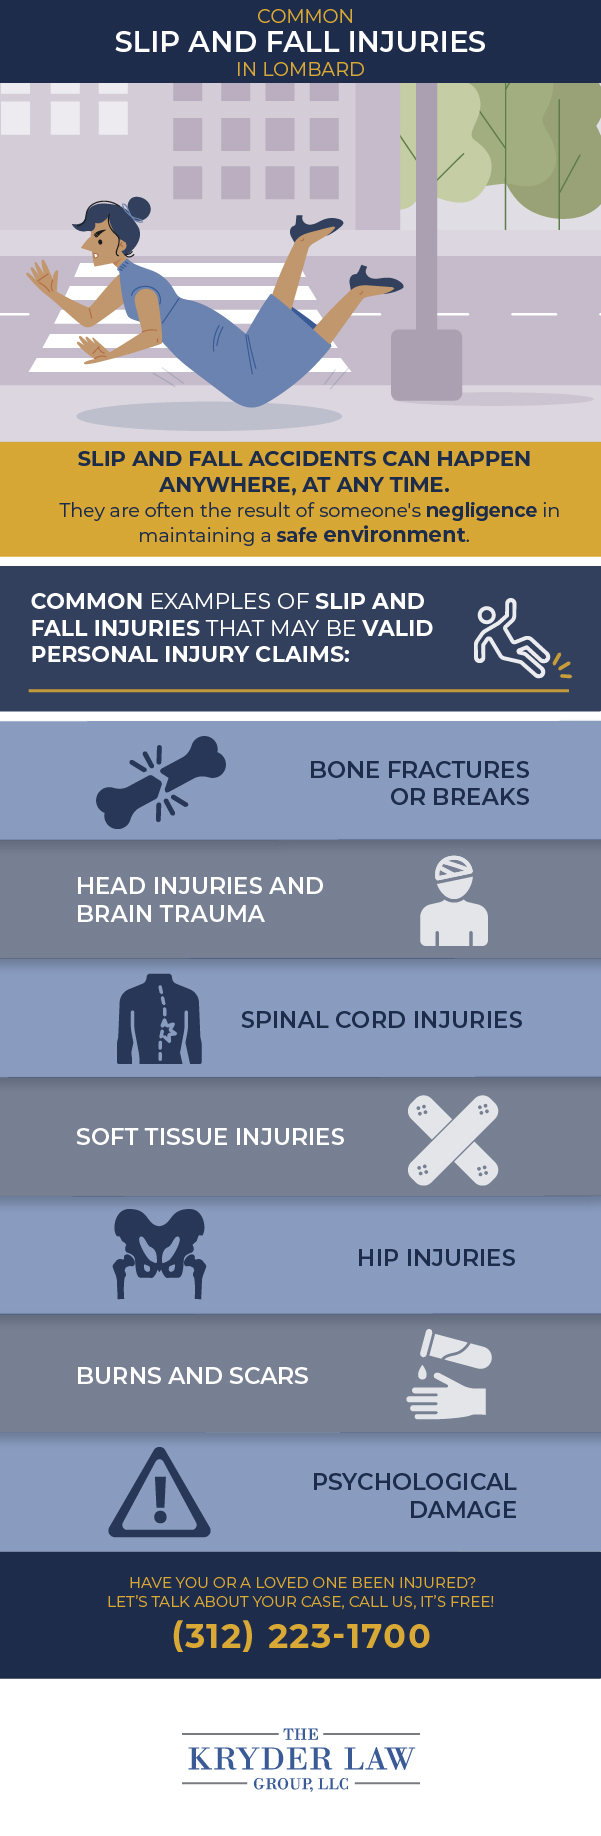 The Benefits of Hiring a Lombard Slip and Fall Injury Lawyer Infographic